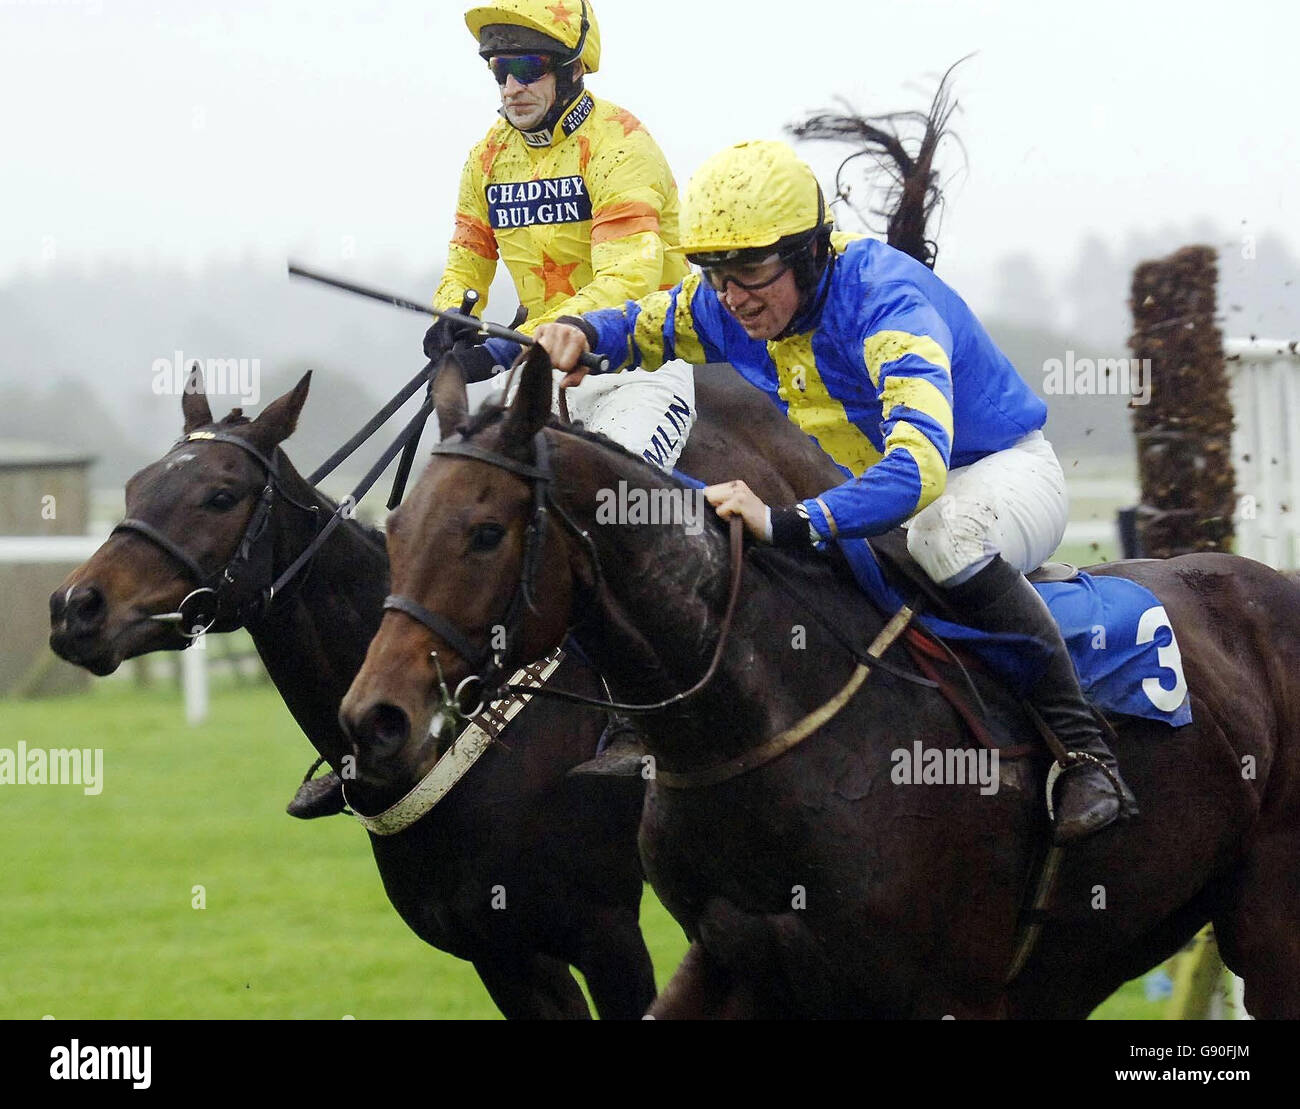 Dancer Life (R) ridden by Christian Williams jumps the last to win the 3663 Duchy of Cornwall Challenge Cup Beginners' Chase at Exeter racecourse, Tuesday October 18, 2005. PRESS ASSOCIATION Photo. Photo credit should read: Barry Batchelor/PA. Stock Photo